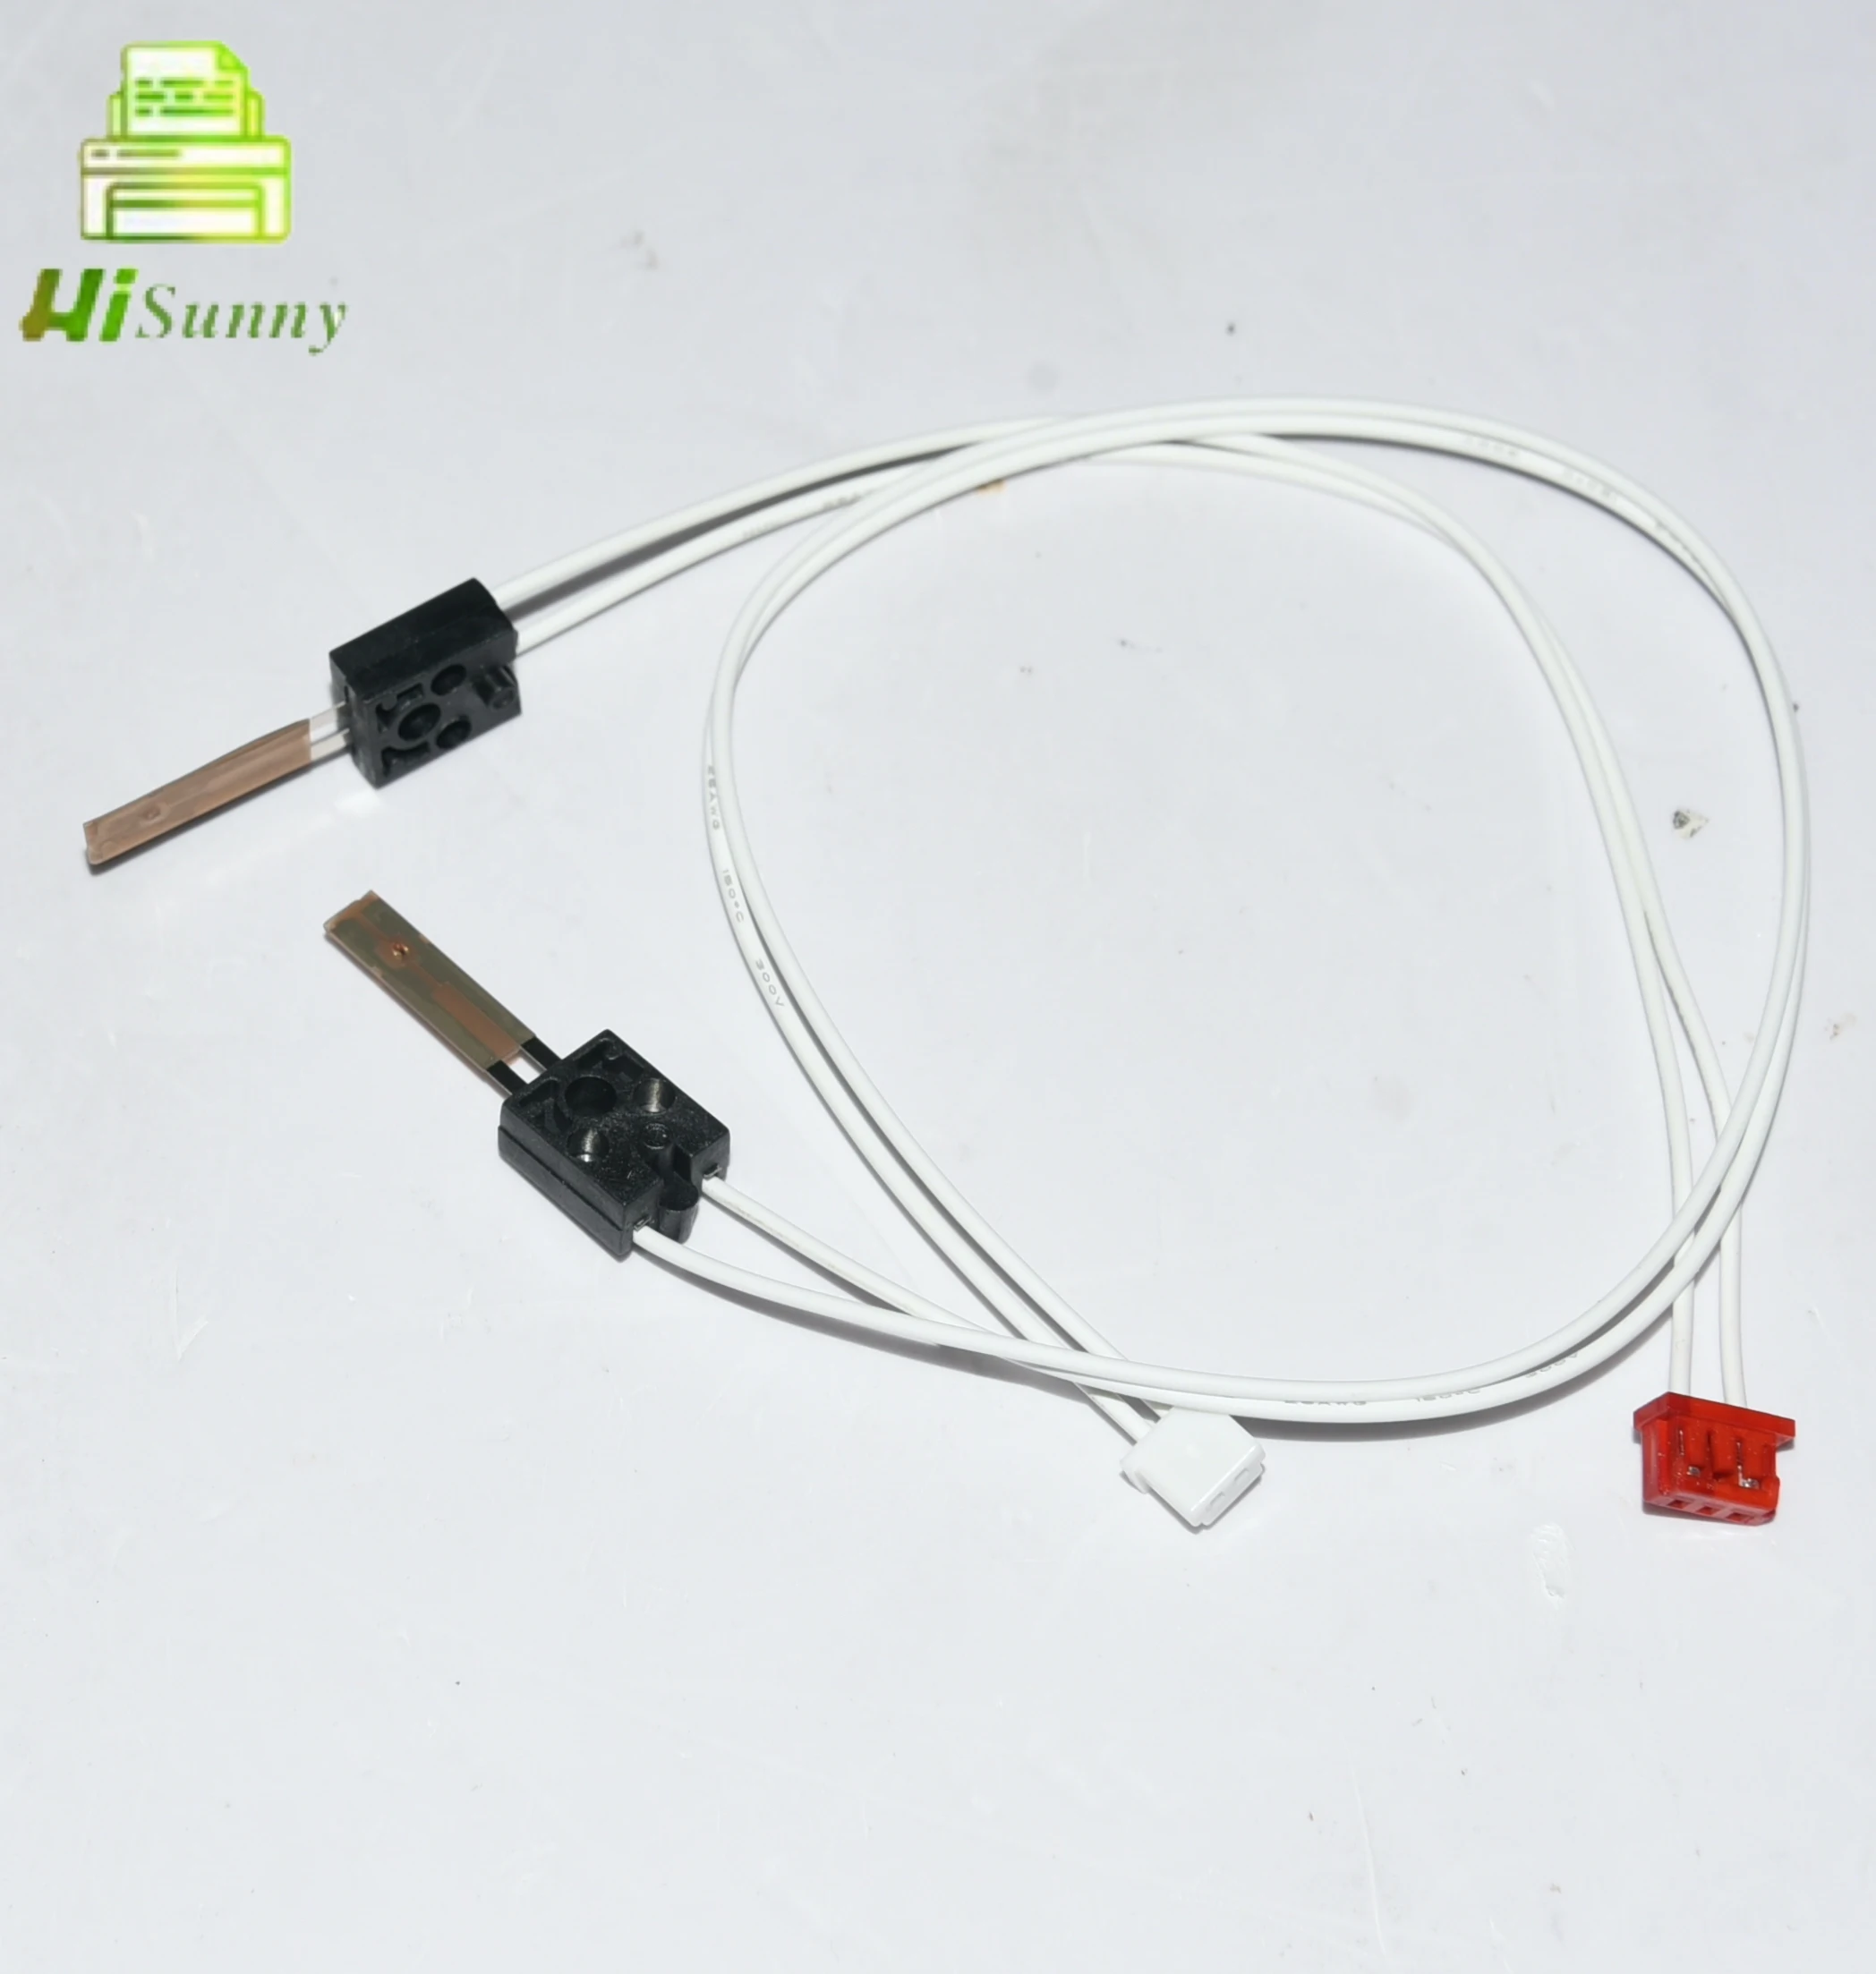 

AW100131 AW100132 Fuser Thermistor Middle Front for Ricoh Aficio 1035 1045 2035 2045 2051 2060 2075 3035 3045 MP 6000 6001 7000